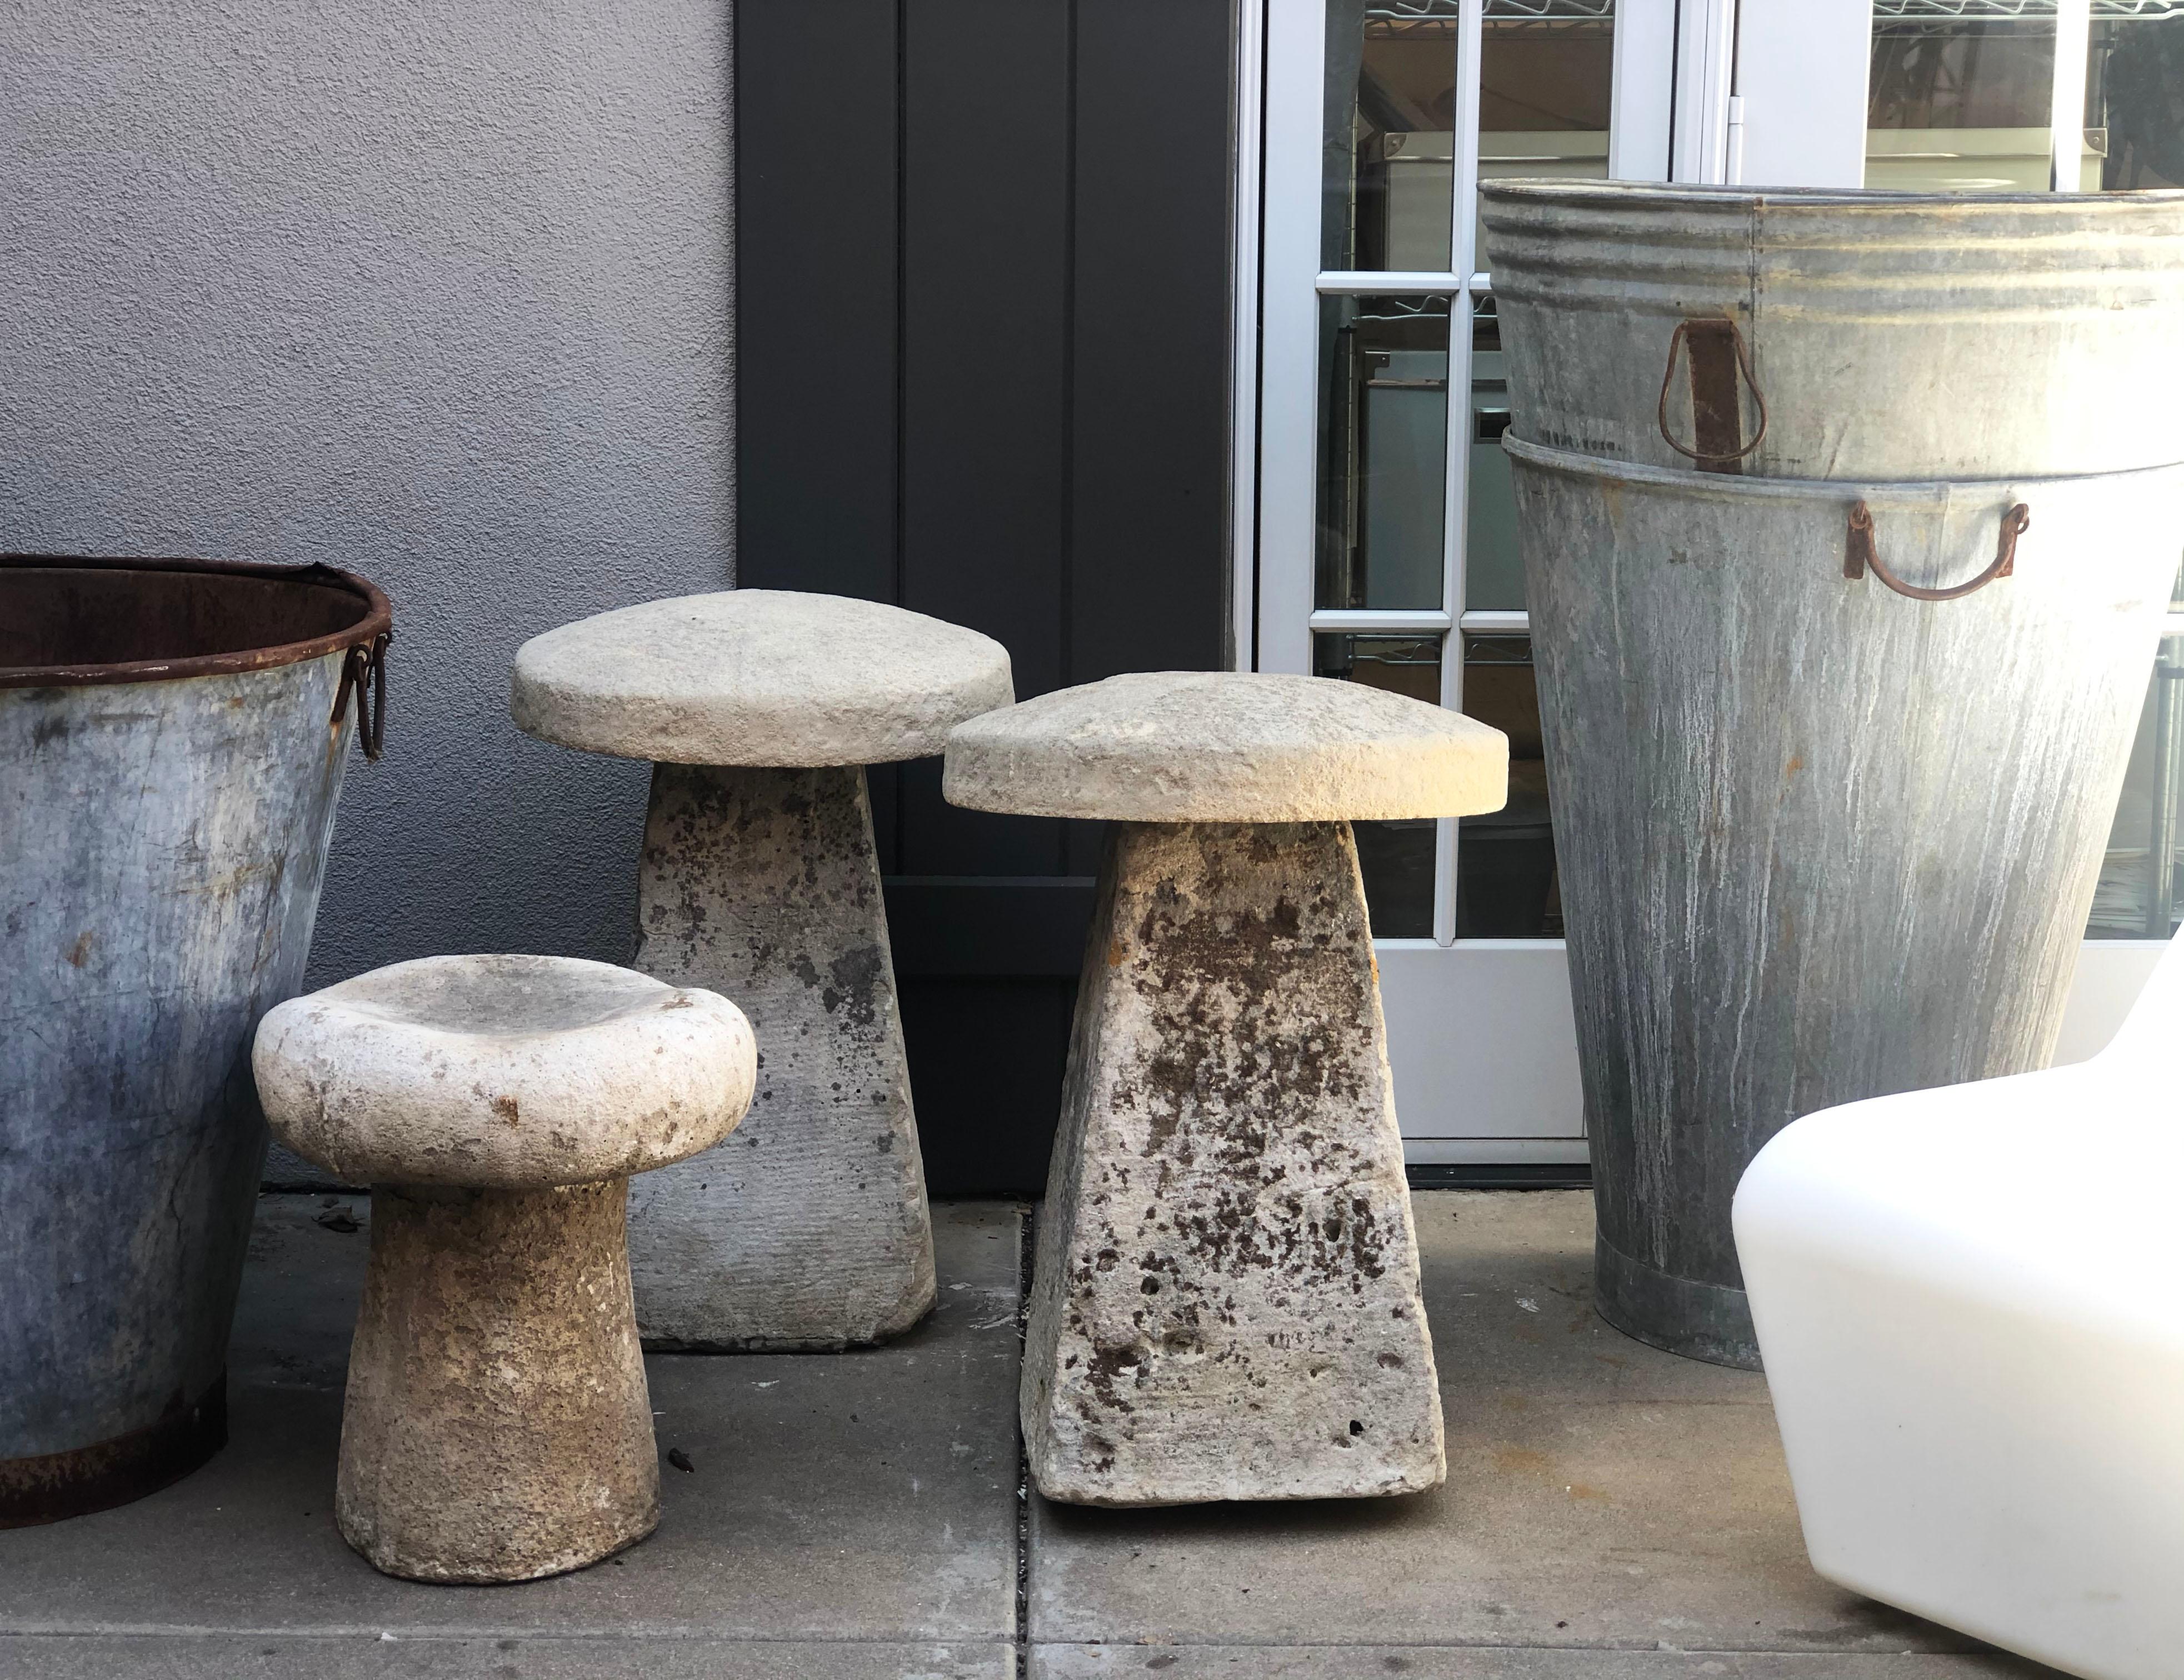 This charming mushroom garden element or stool is the perfect height for sitting or just to place in a garden bed.